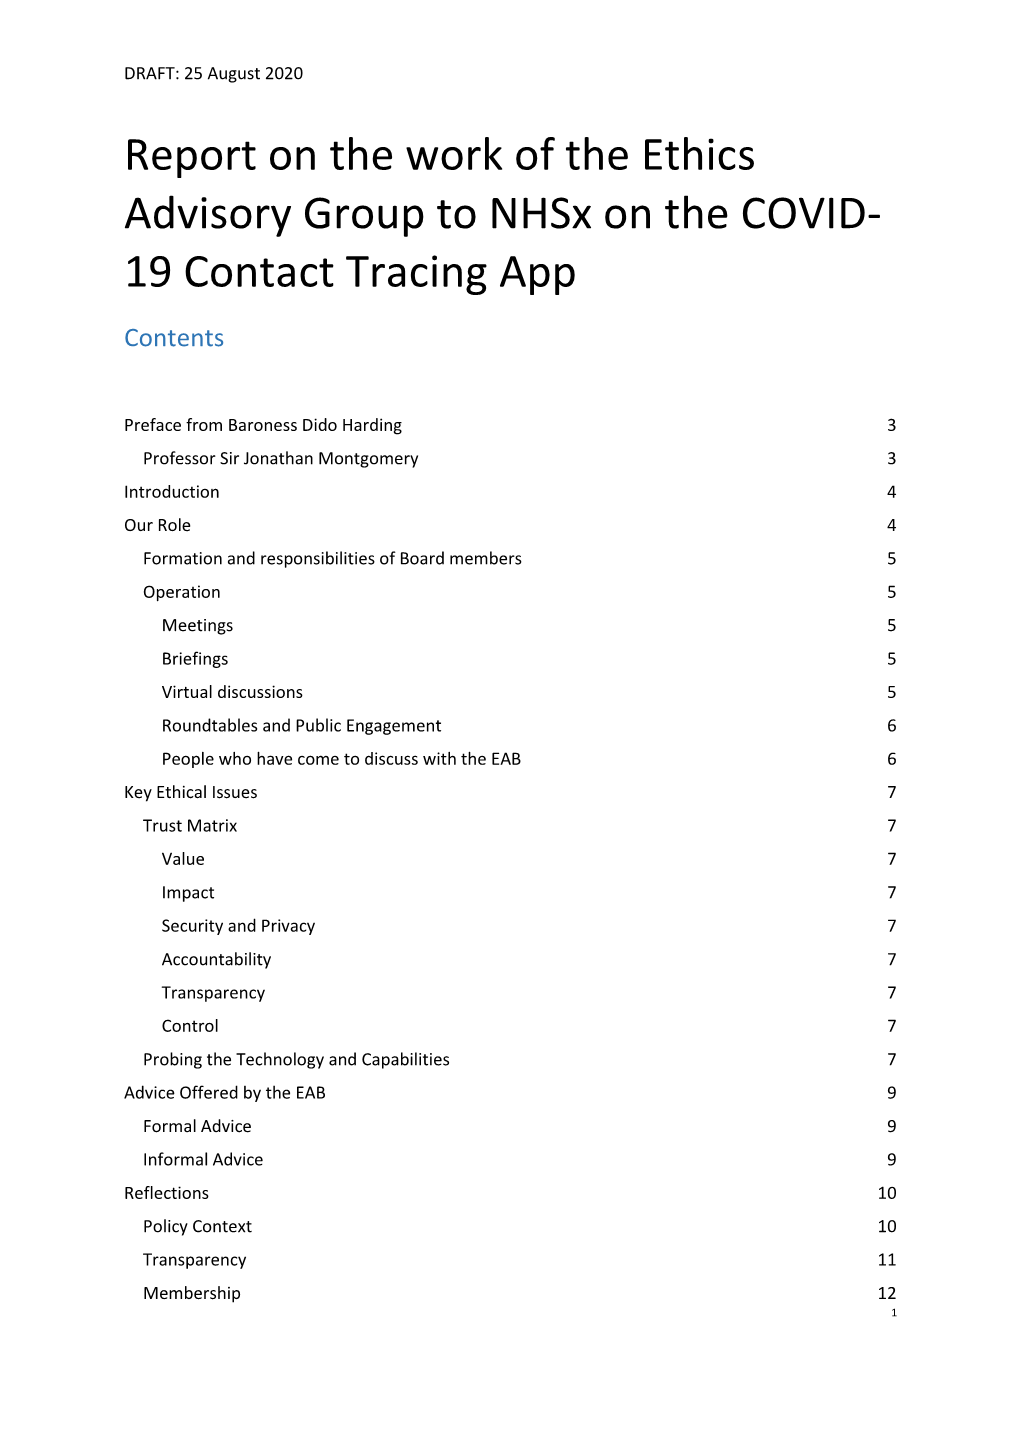 Report on the Work of the Ethics Advisory Group to Nhsx on the COVID-10 Contact Tracing